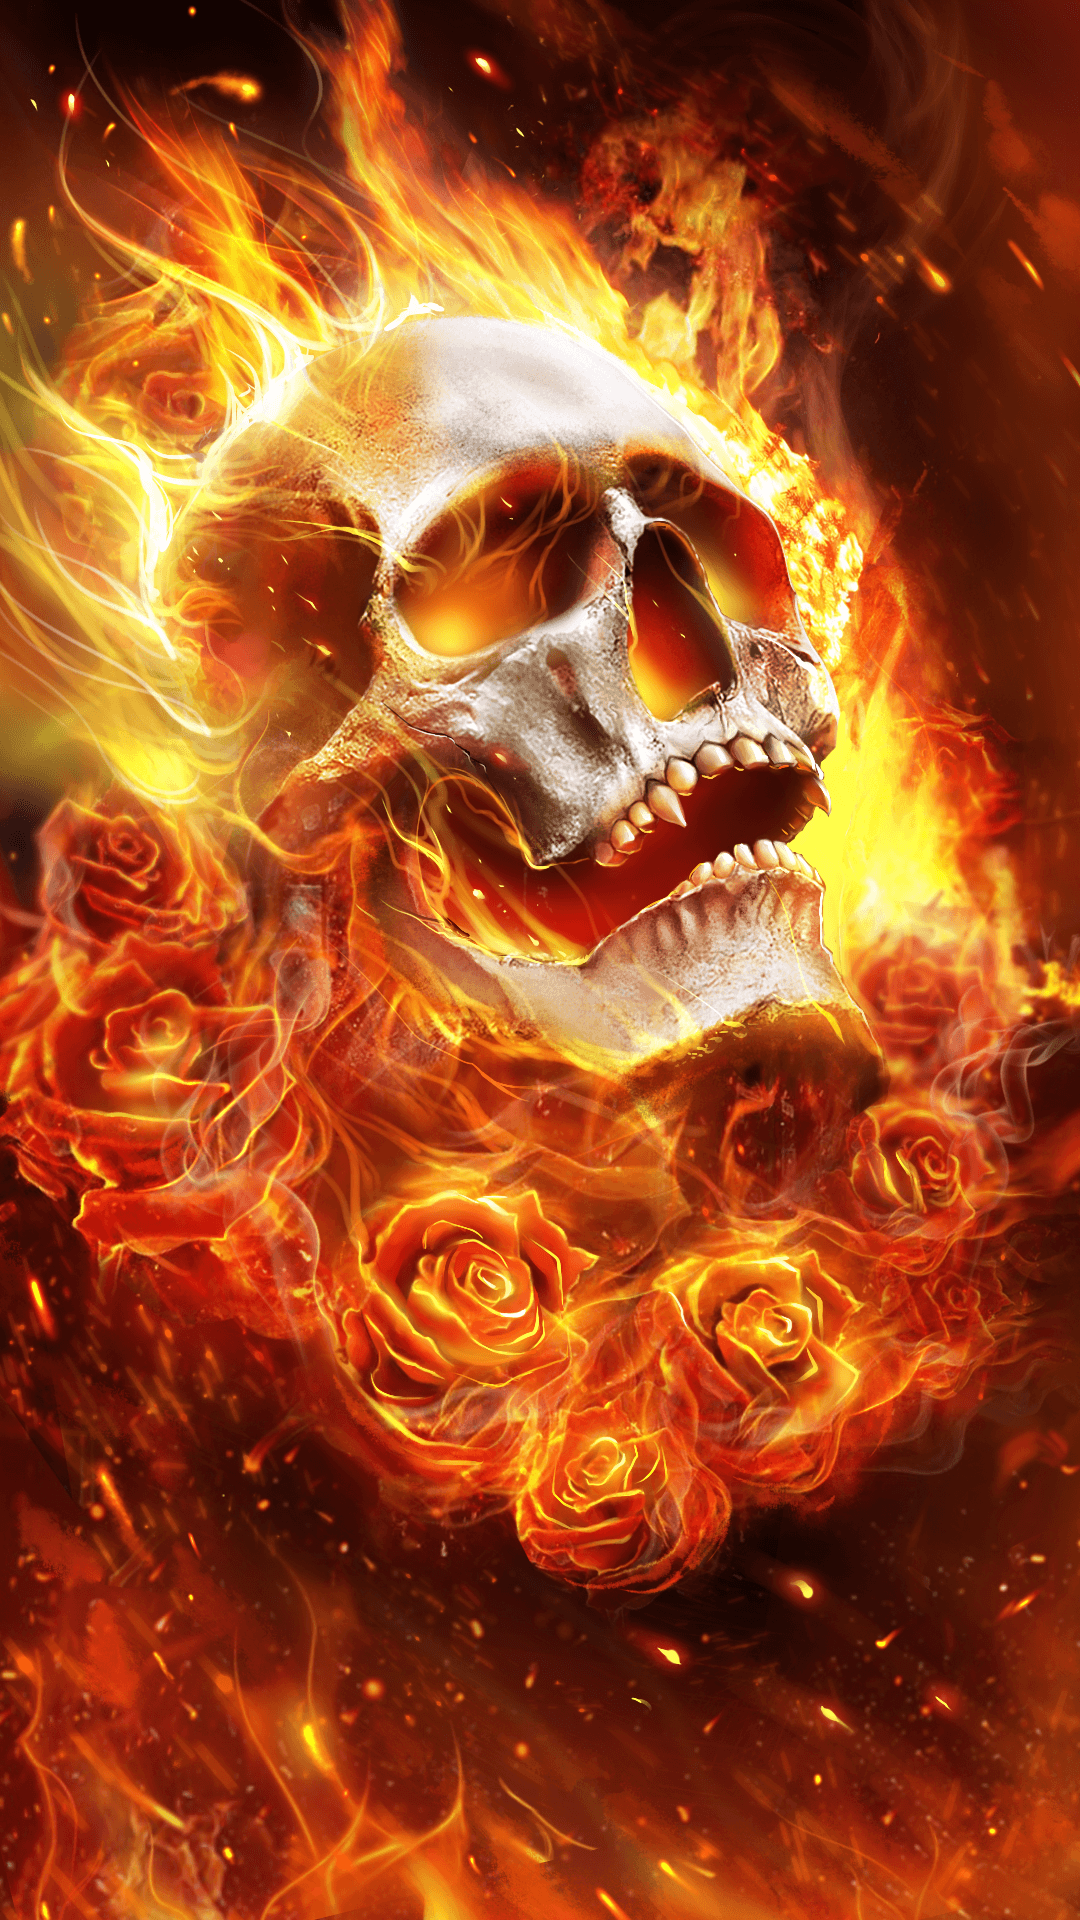 Cool Flaming Skull Wallpapers Wallpapers